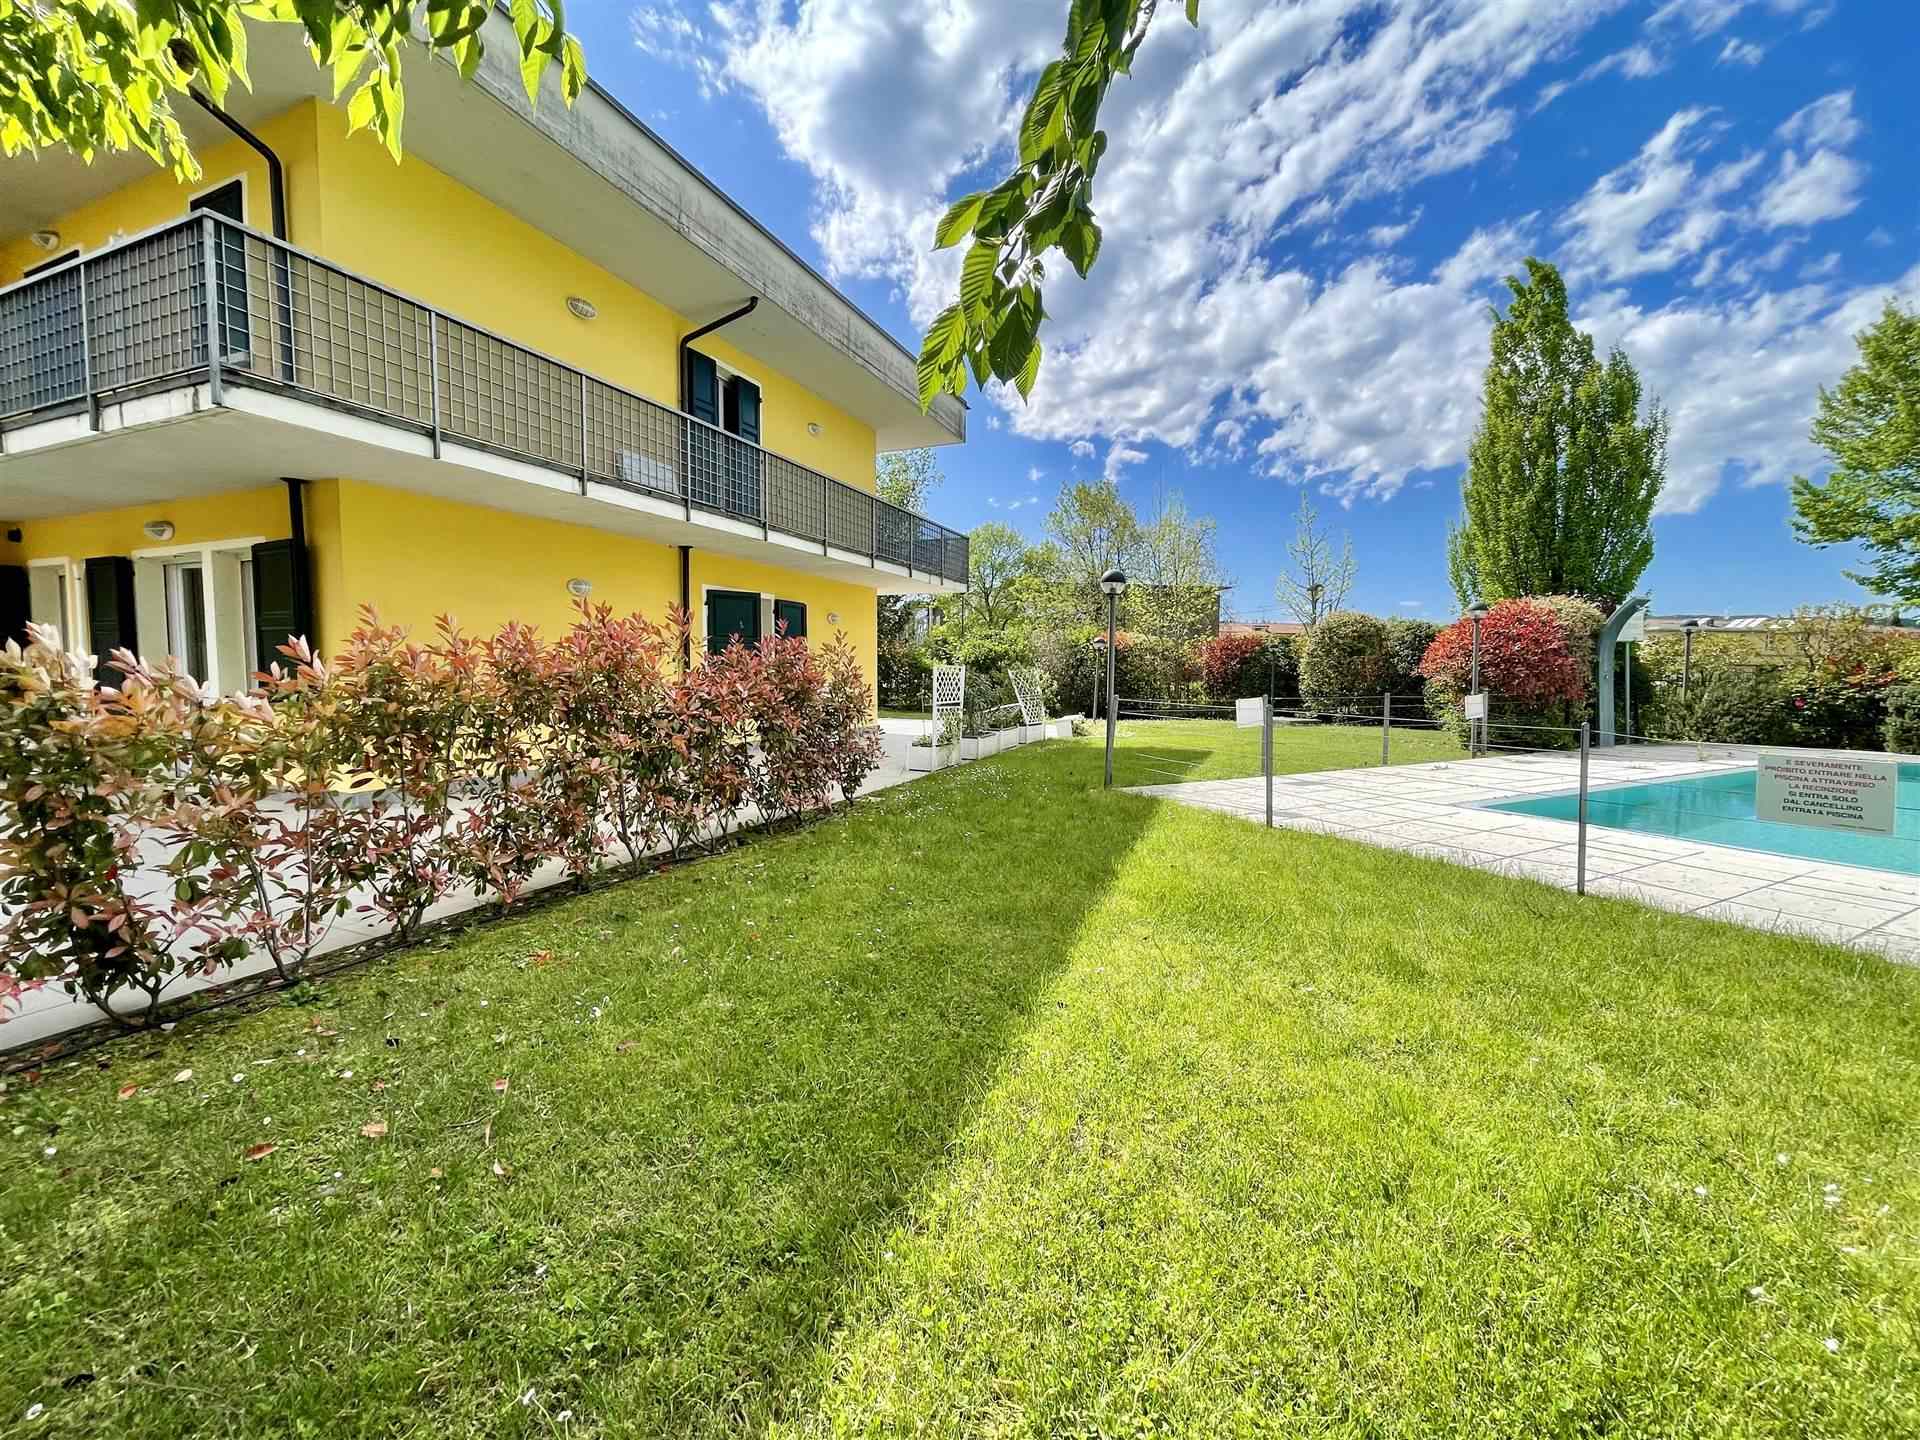 MANERBA DEL GARDA, Duplex villa for sale of 145 Sq. mt., Heating Individual heating system, Energetic class: B, placed at Ground, composed by: 5 